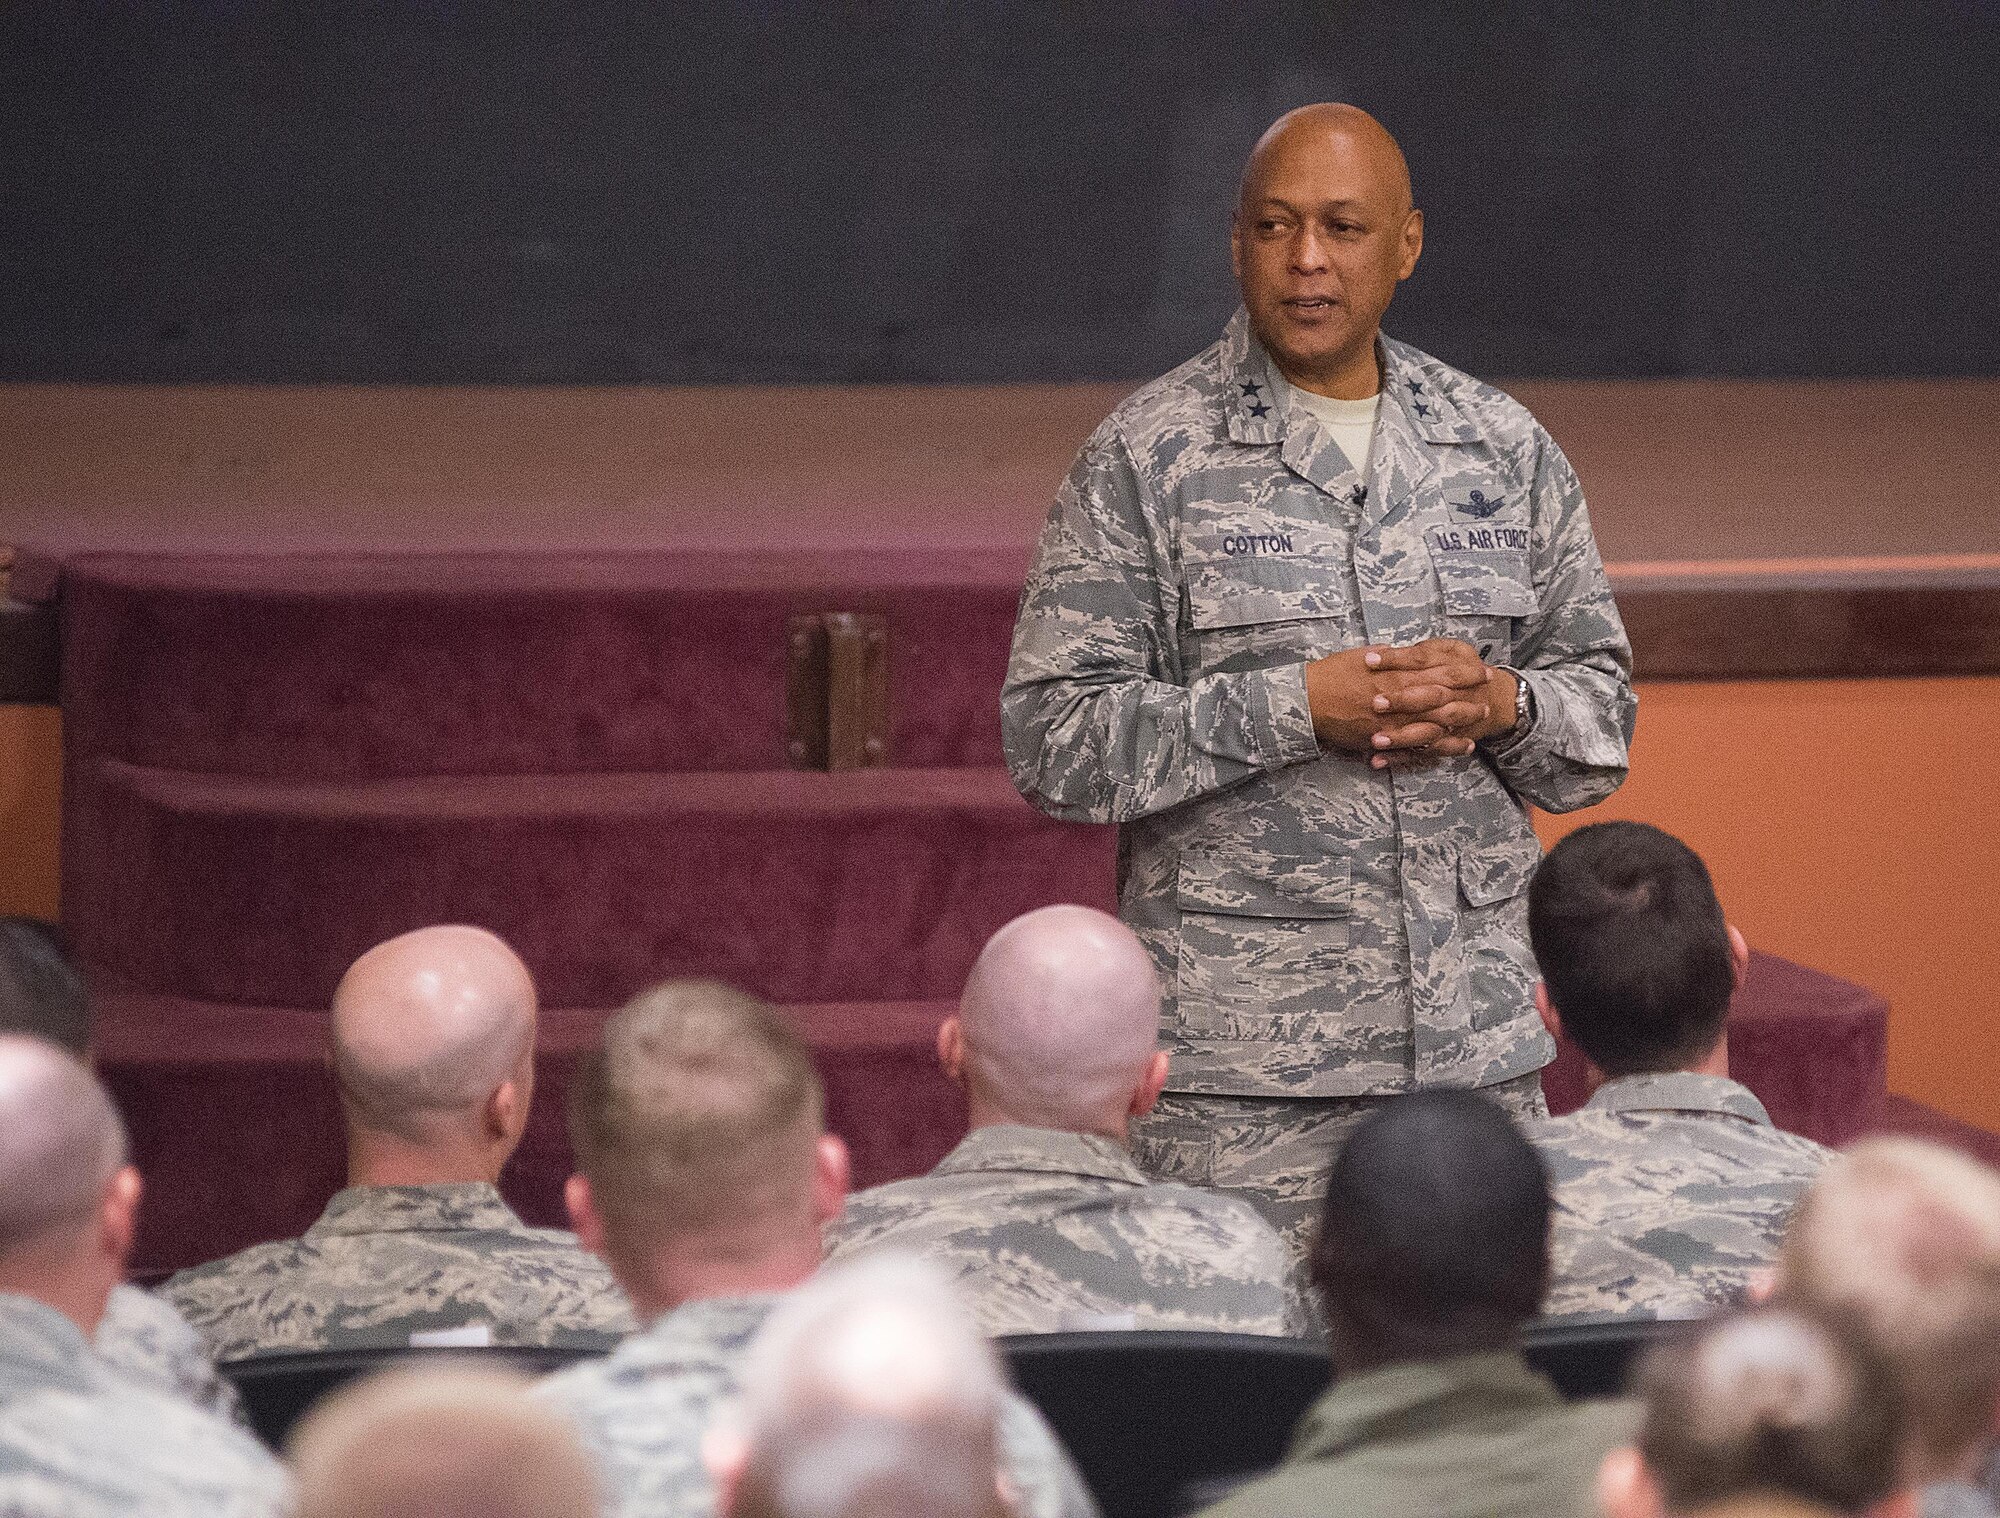 Maj. Gen. Tony Cotton, 20th Air Force and Combined Task Force 214 commander,  talks to 90th Missile Wing and 20th AF Headquarters Airmen during a commander's call in the F.E. Warren Air Force Base, Wyo., base theater Dec. 9, 2015. Cotton recently visited most of the wings of the 20th AF, which he assumed command of on Nov. 16. (U.S. Air Force photo by R.J. Oriez)